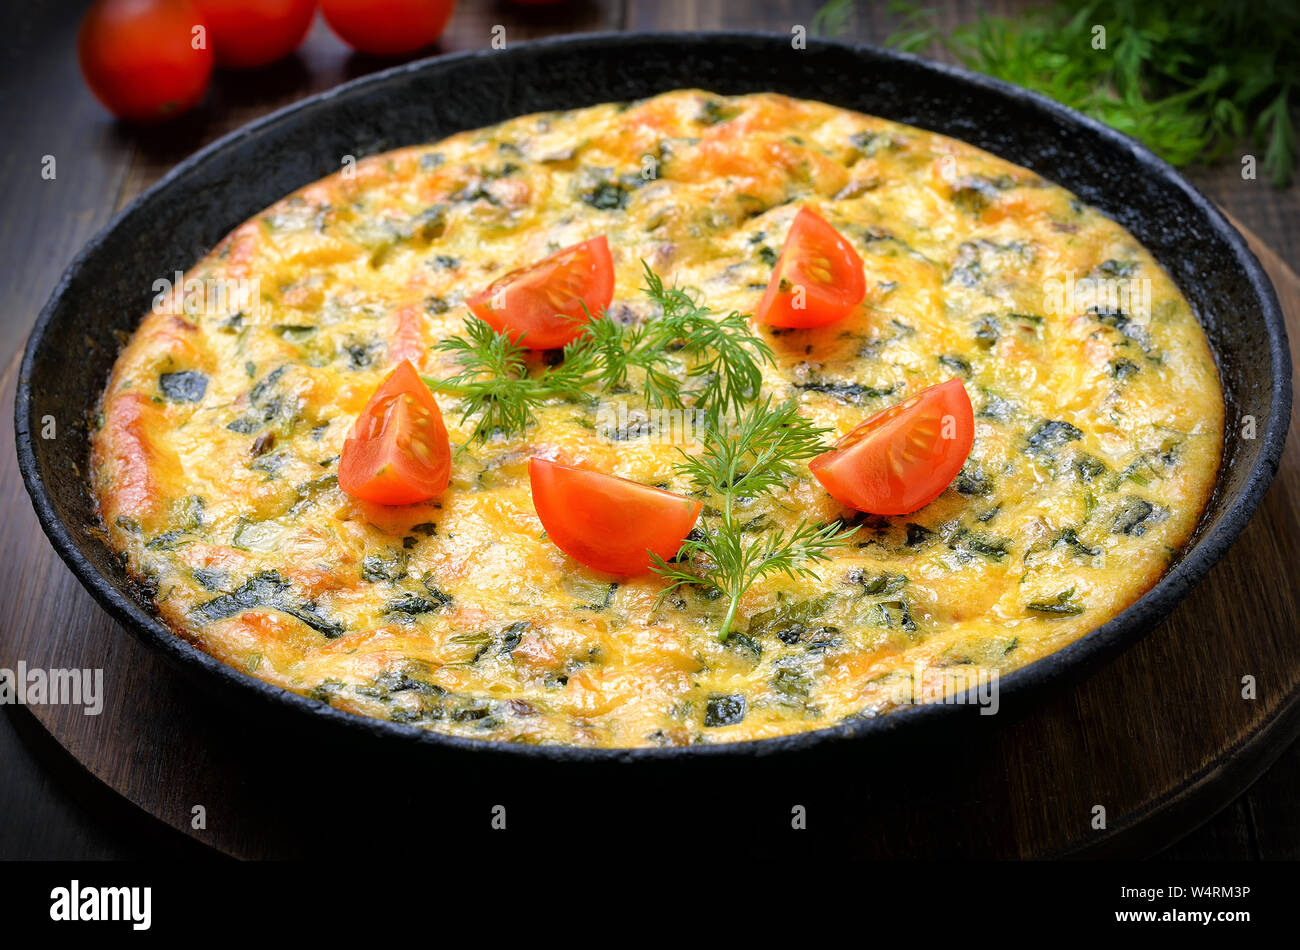 Omelette in frying pan on wooden table, close up Stock Photo